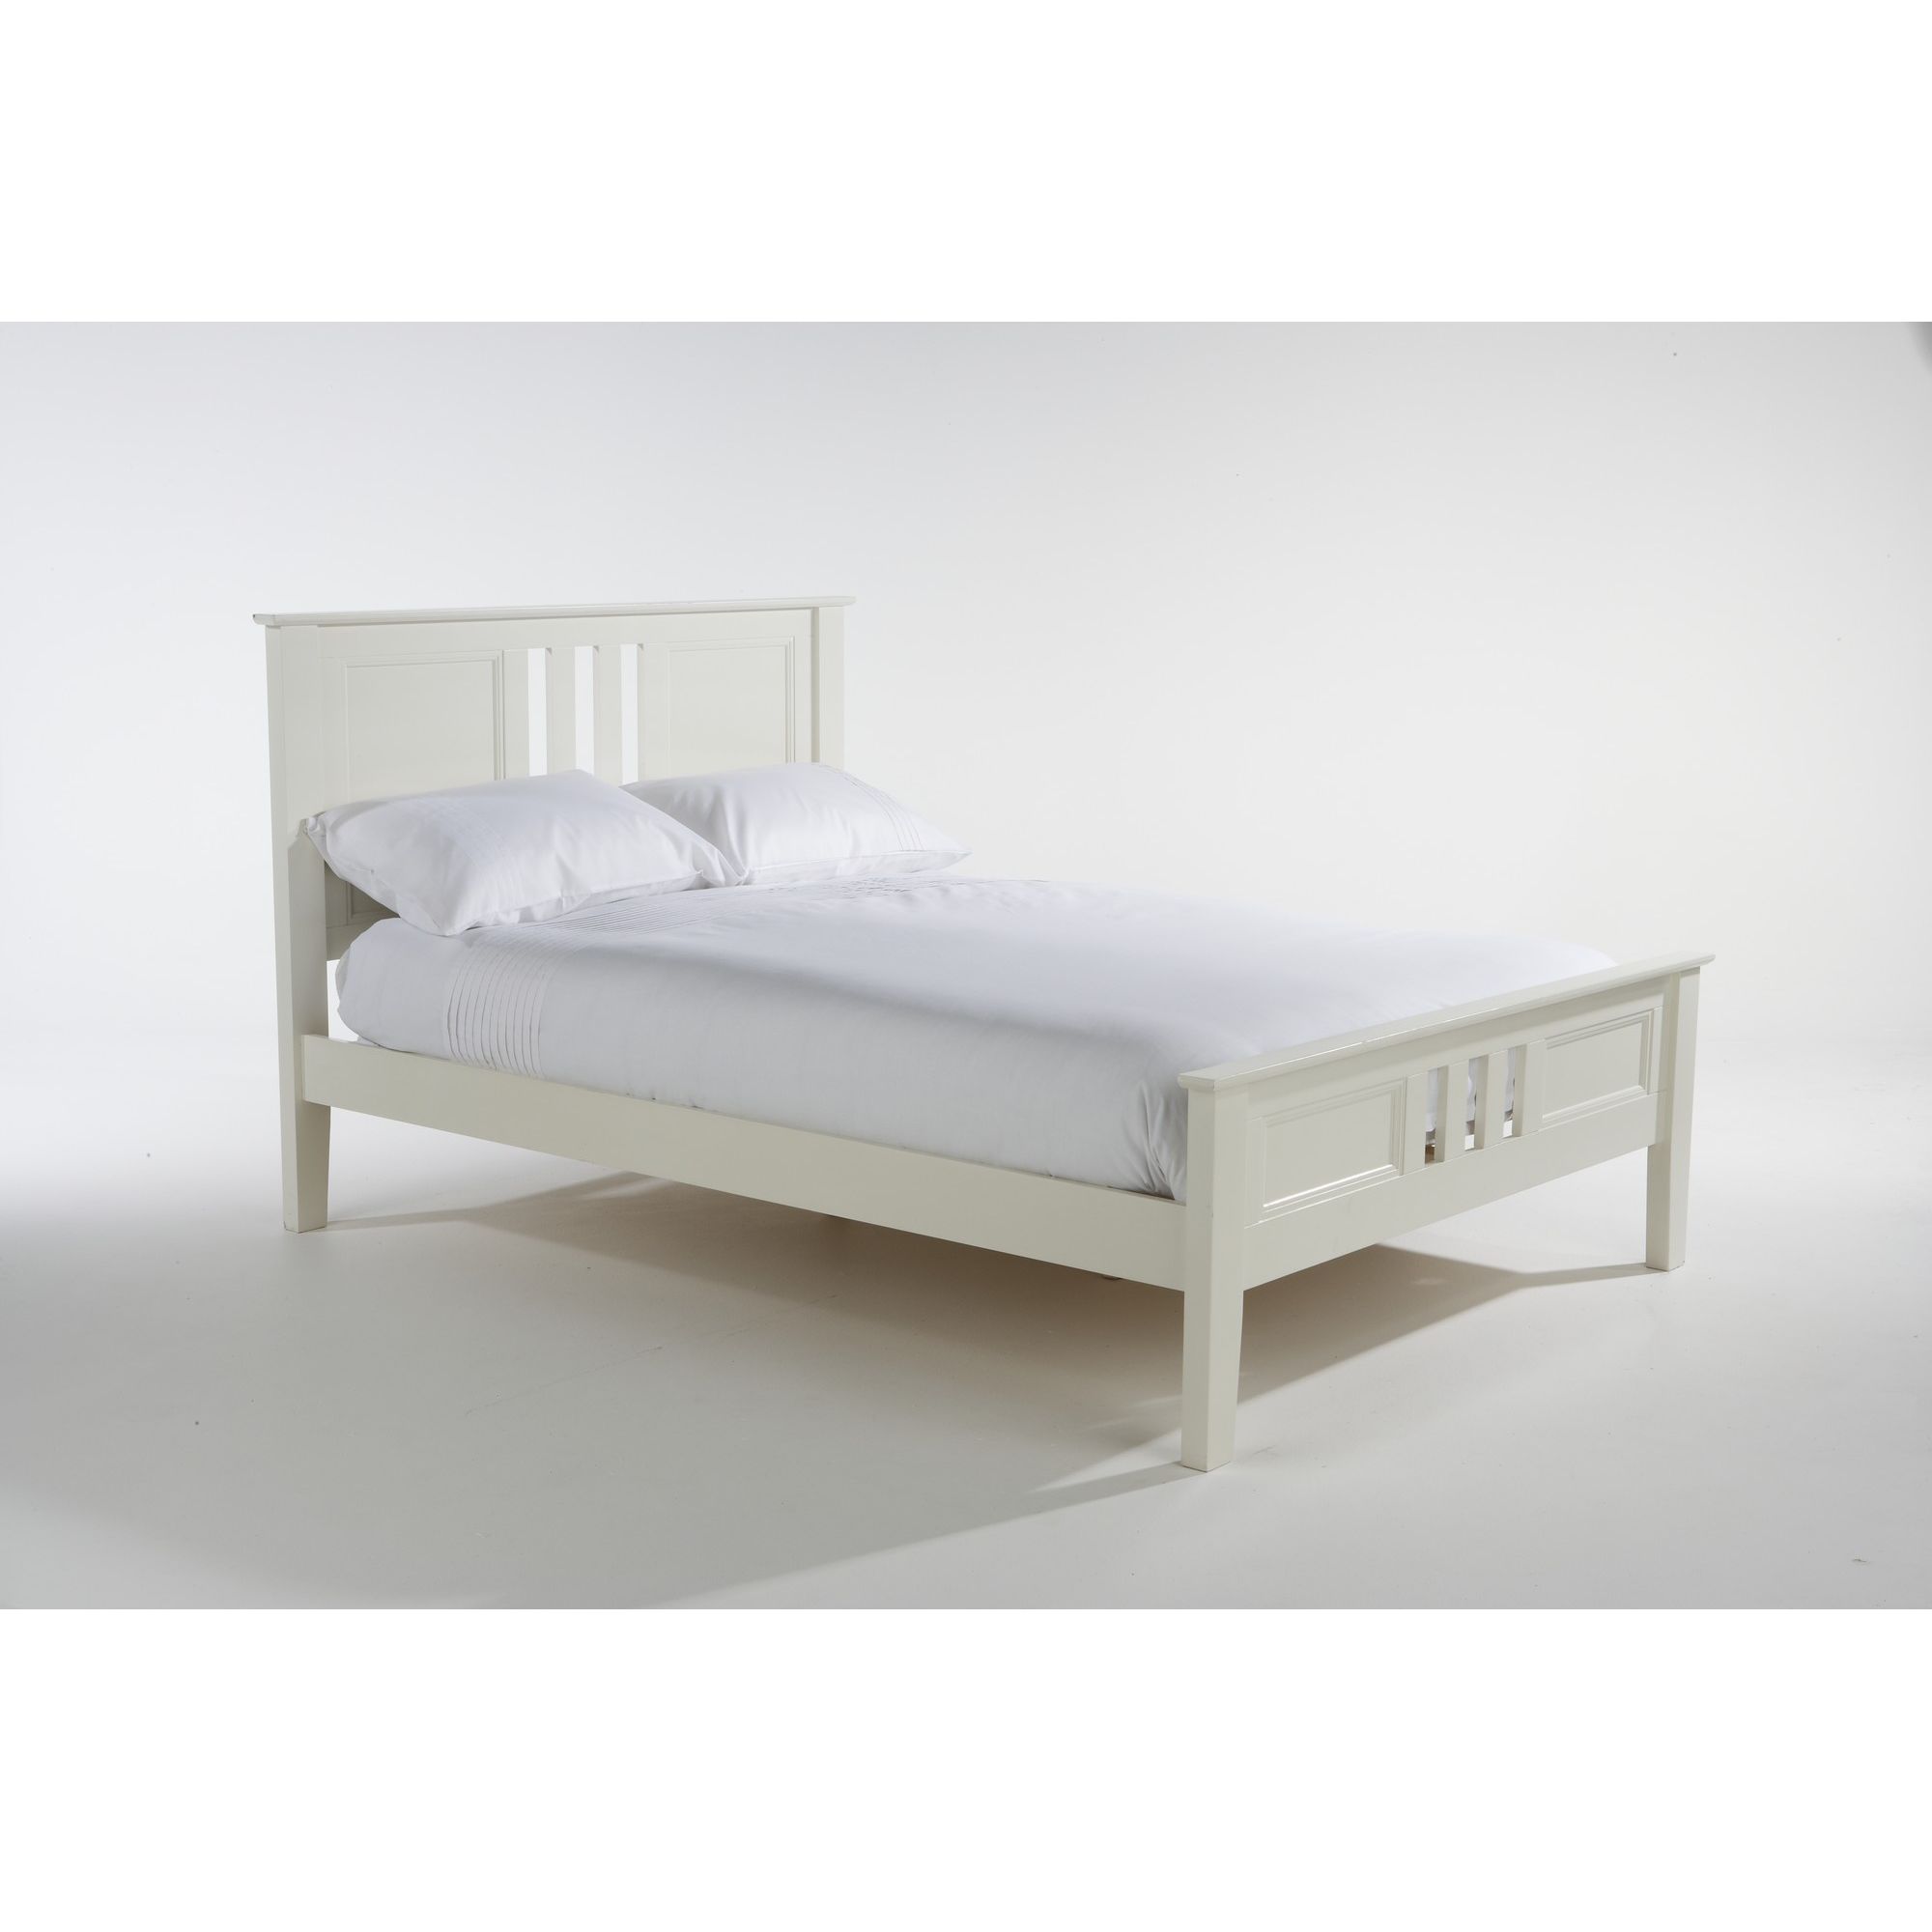 Elements Venice Bed - King at Tesco Direct